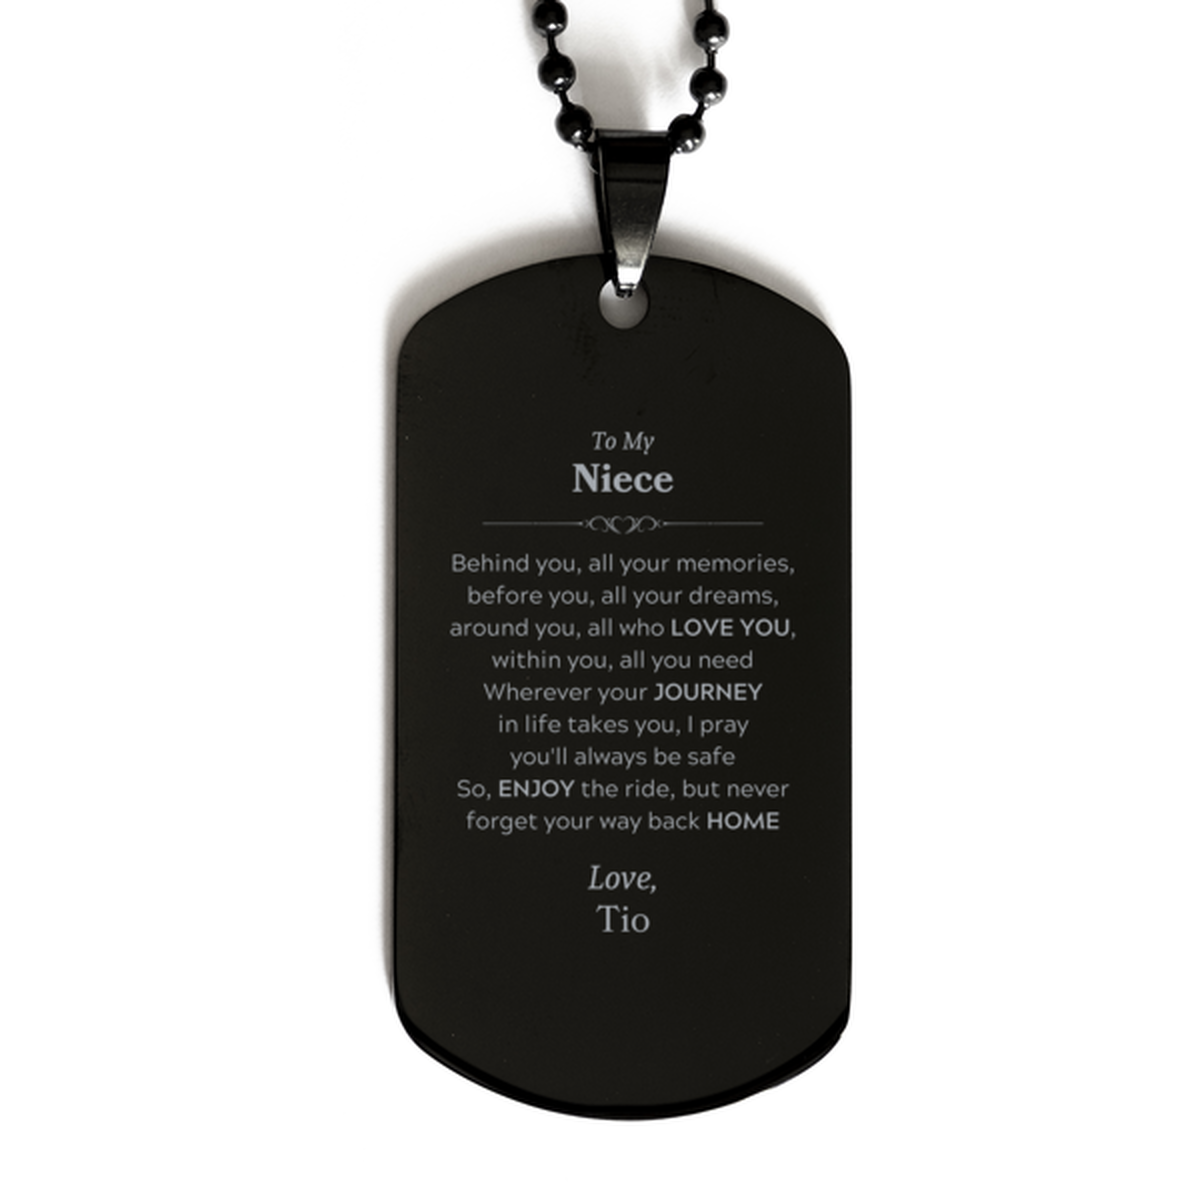 To My Niece Graduation Gifts from Tio, Niece Black Dog Tag Christmas Birthday Gifts for Niece Behind you, all your memories, before you, all your dreams. Love, Tio